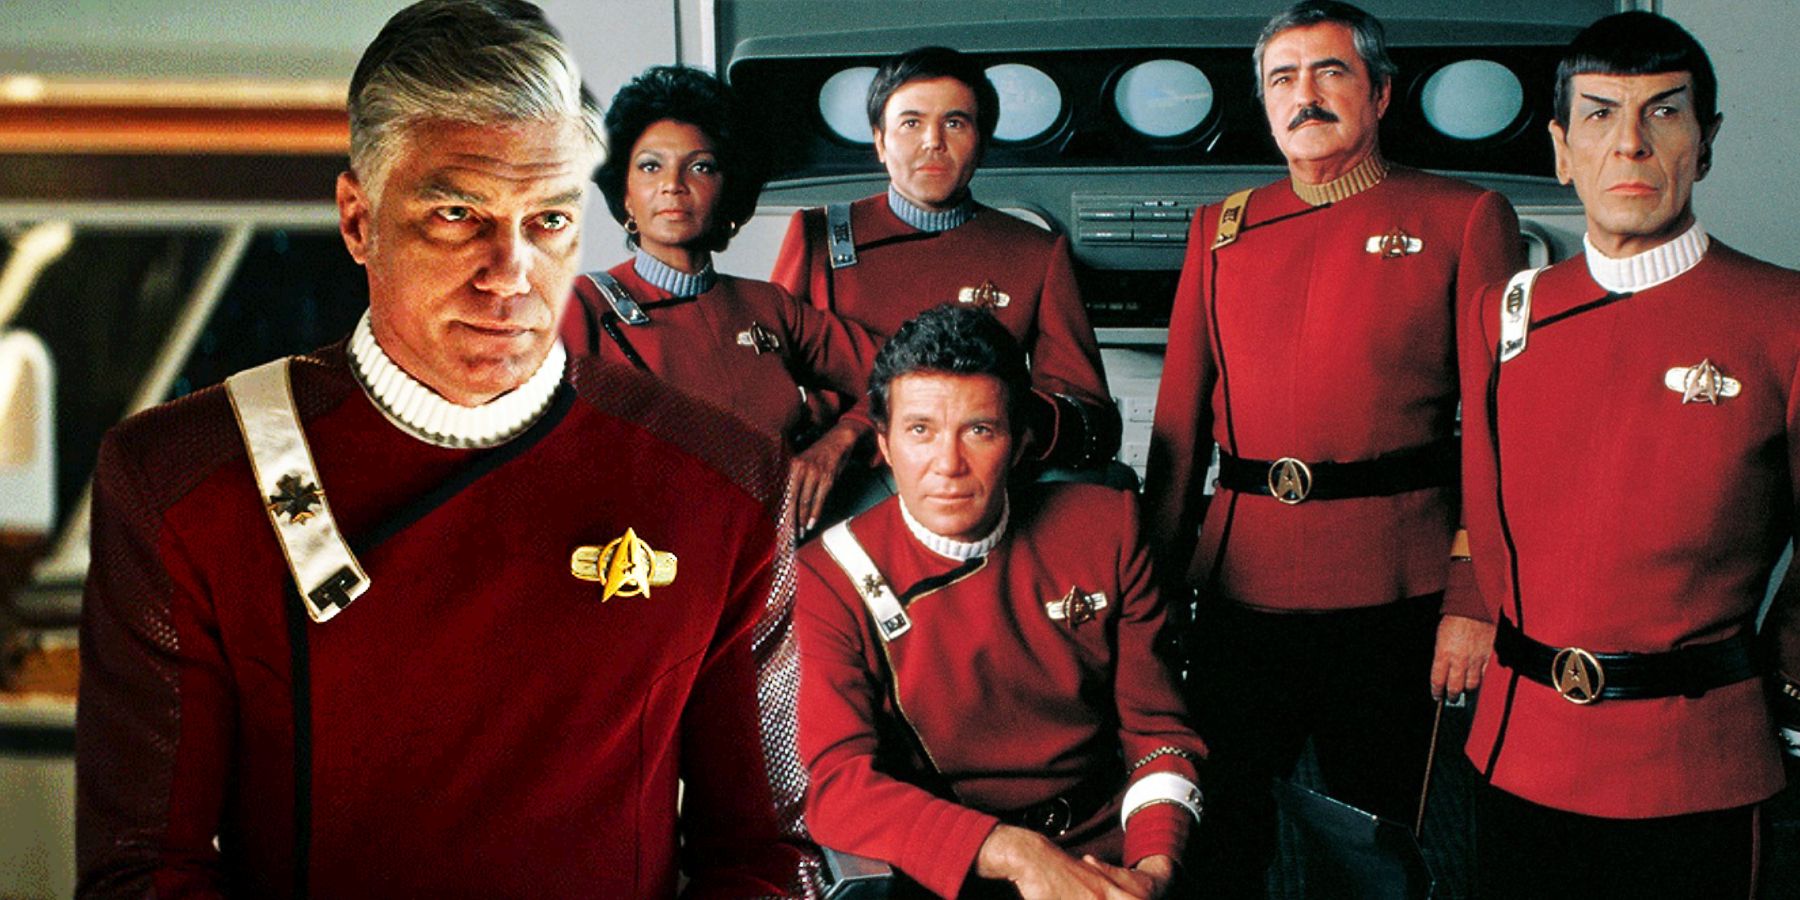 Admiral Pike in a TOS movie uniform and the cast of Wrath of Khan